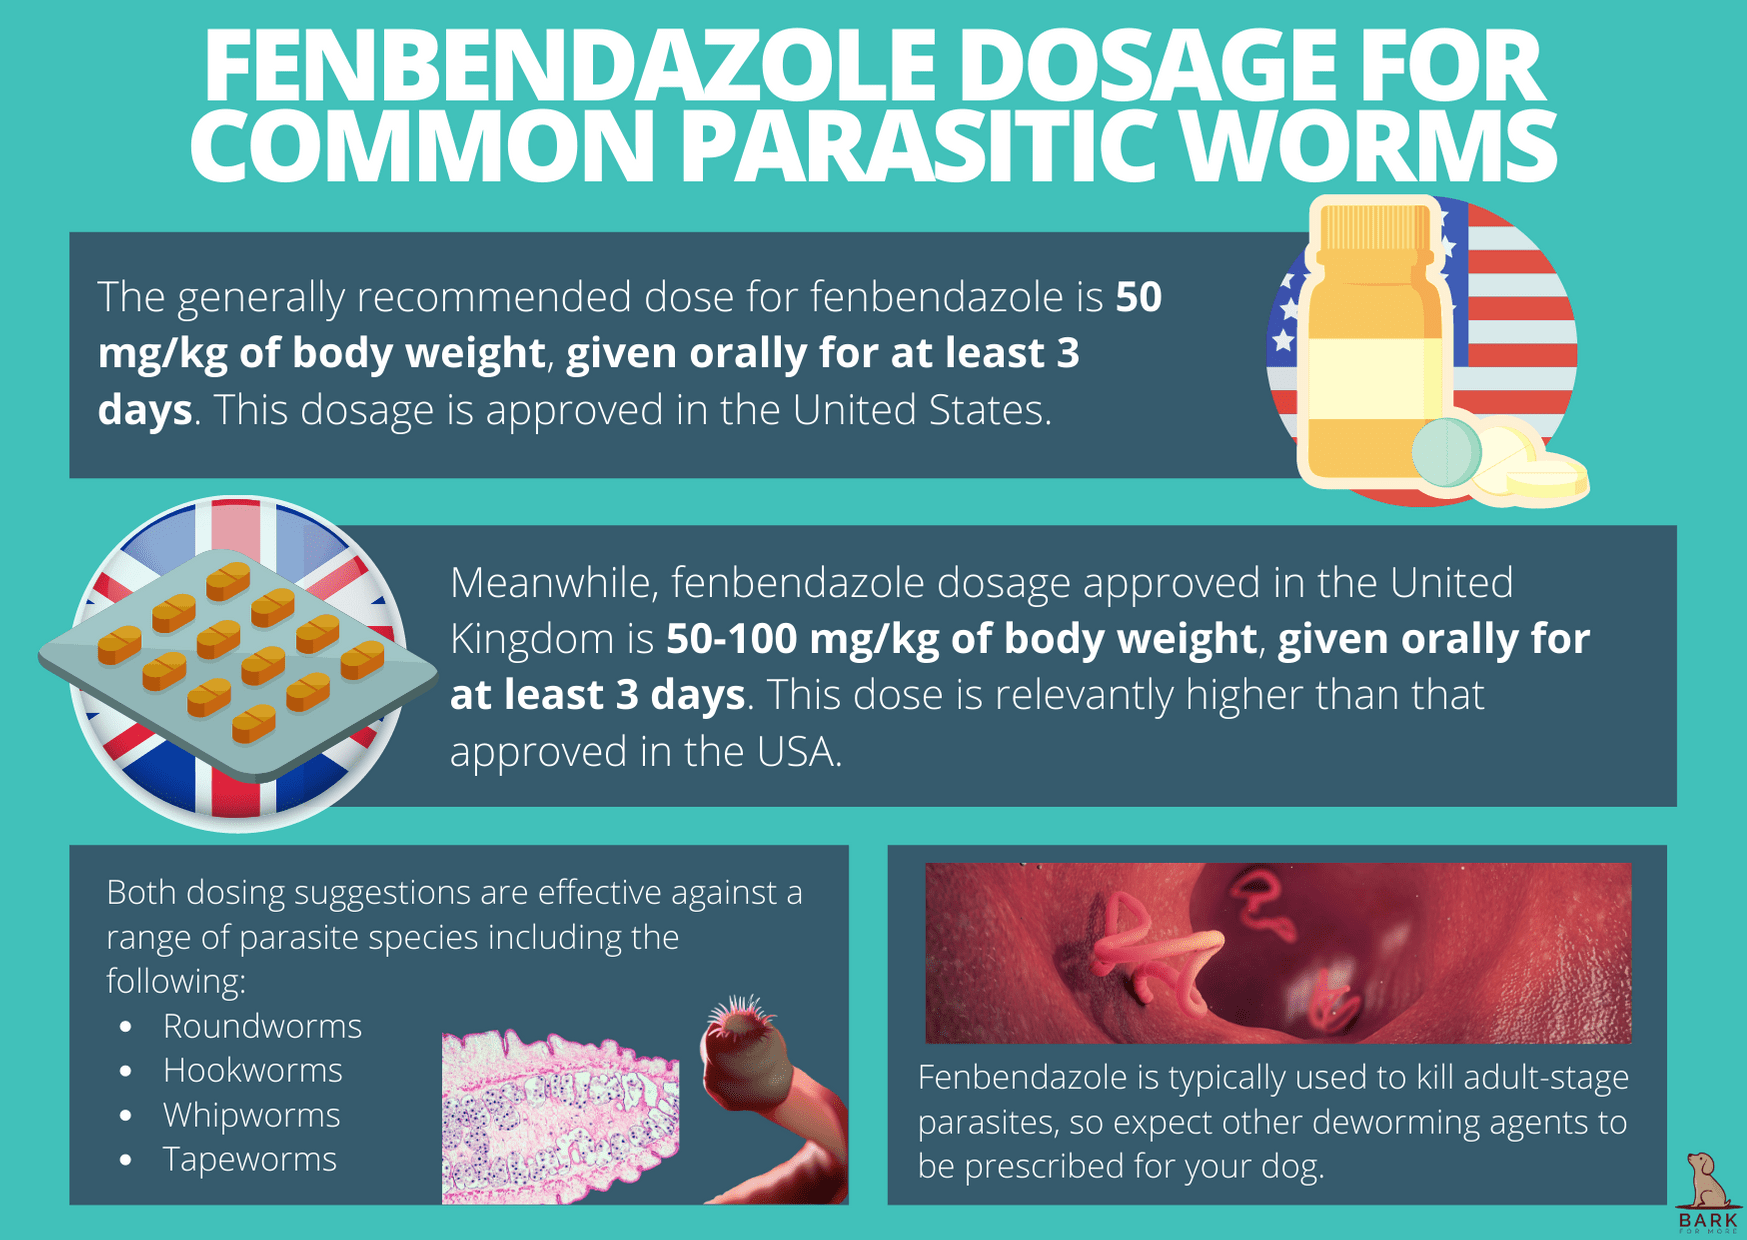 Fenbendazole Dosage Recommendations for Common Parasitic Worms